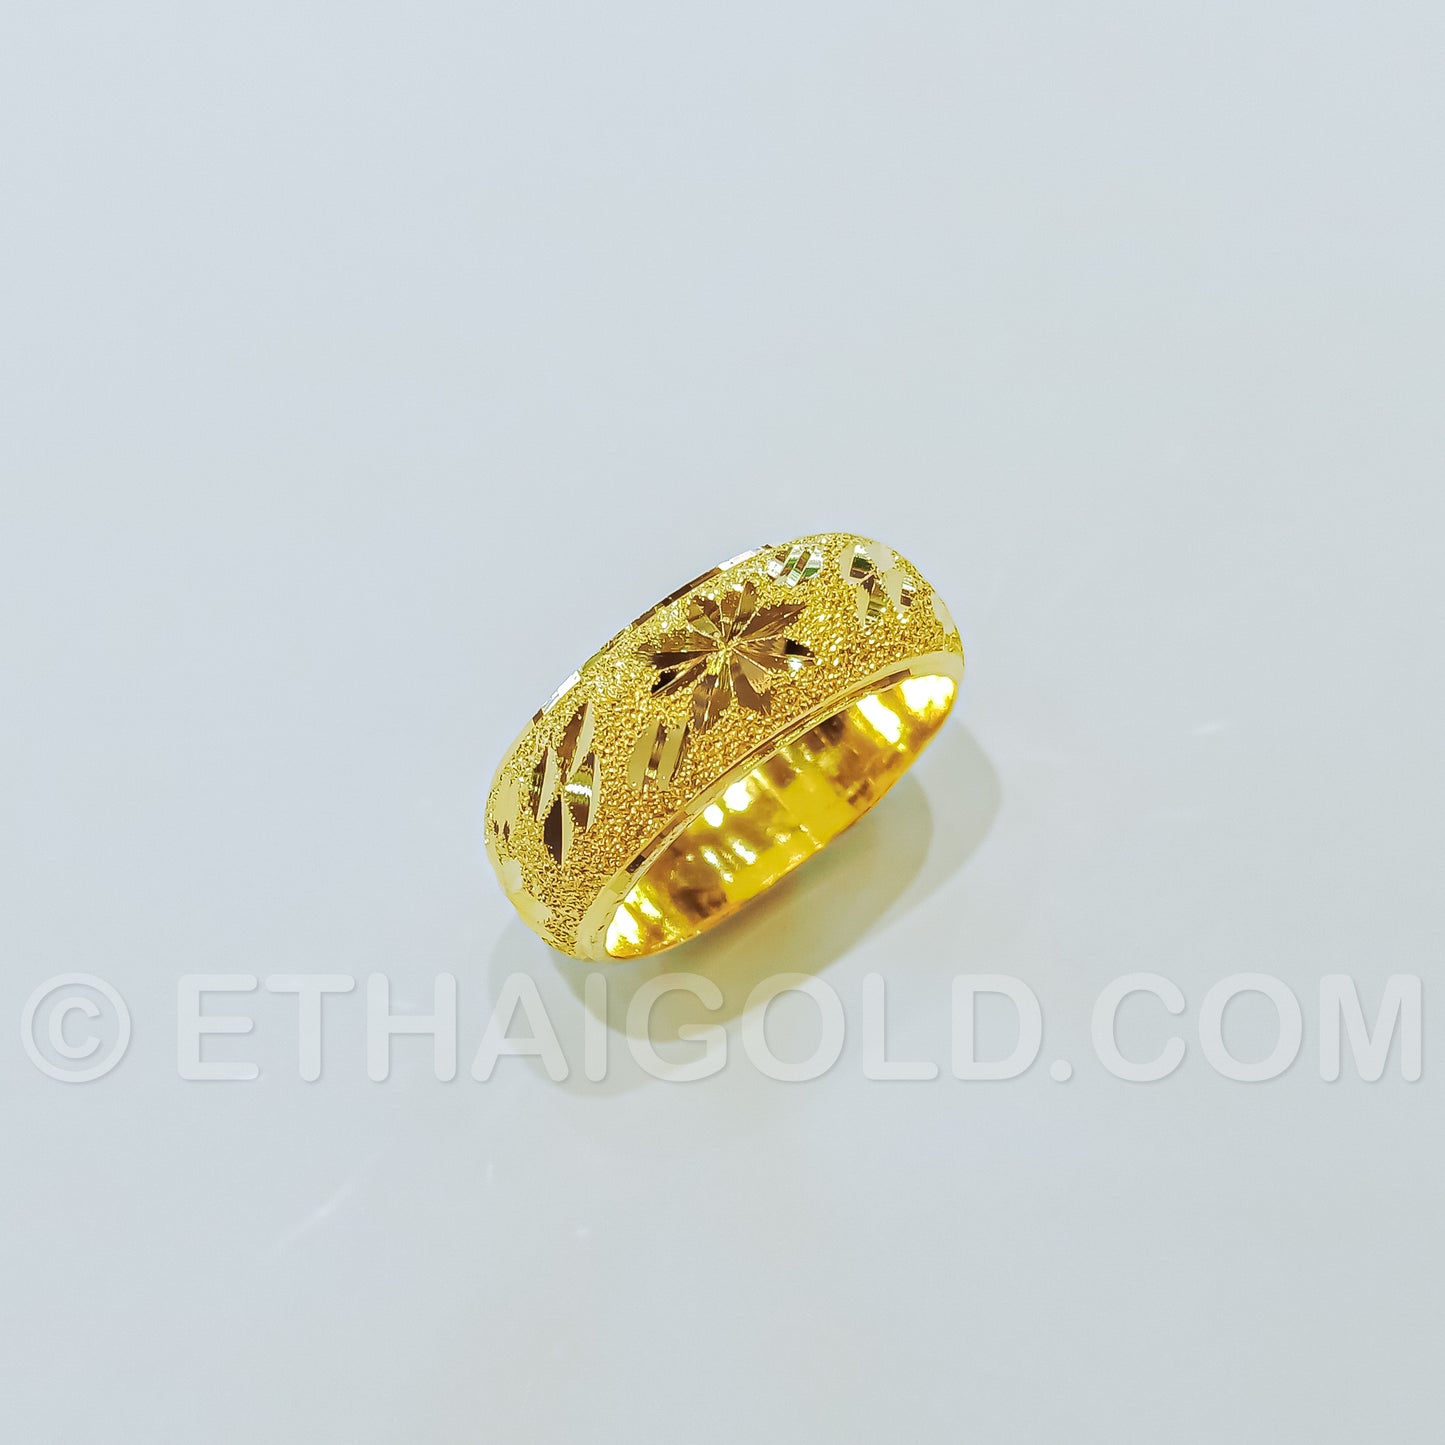 1/4 BAHT POLISHED SPARKLING DIAMOND-CUT HOLLOW DOMED BAND RING IN 23K GOLD (ID: R0301S)